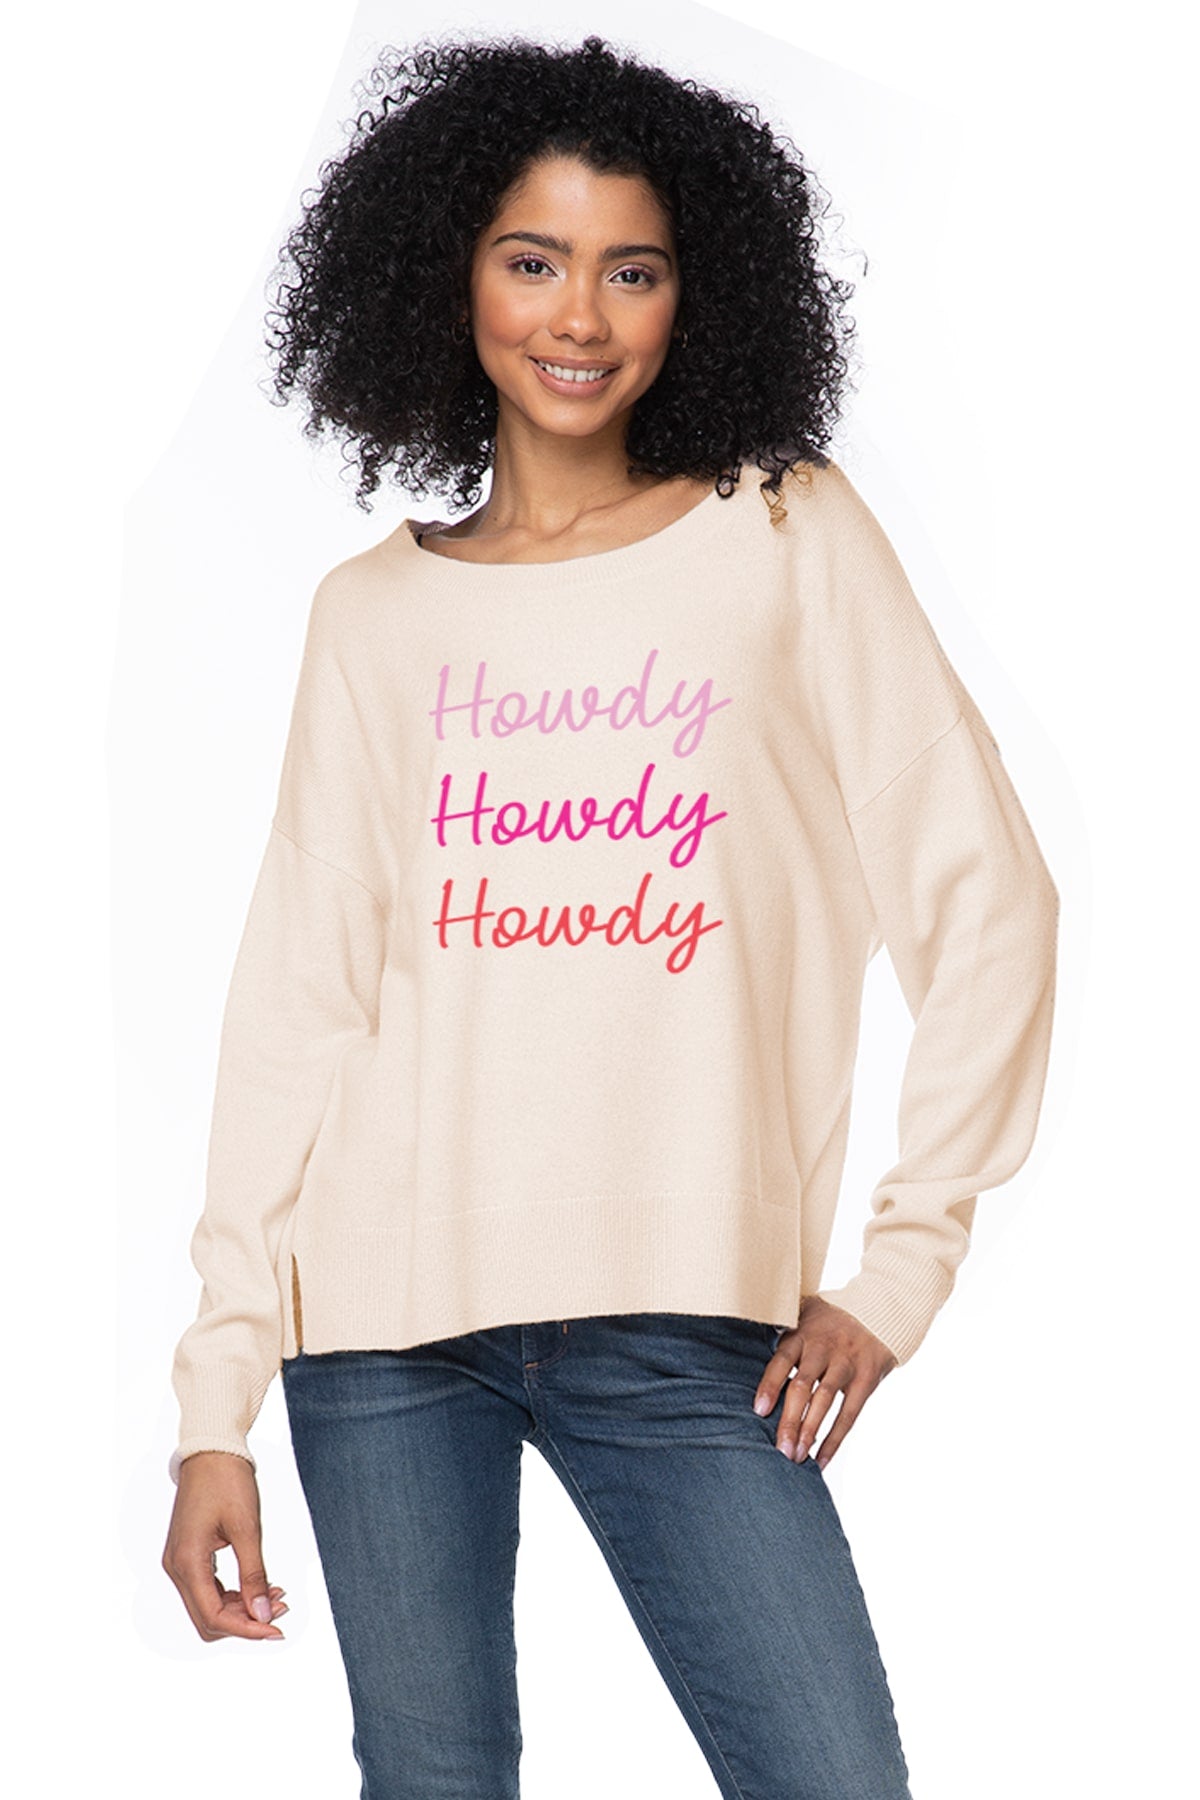 "Howdy Howdy Howdy" // Life is Good Crew Cashmere Sweater "